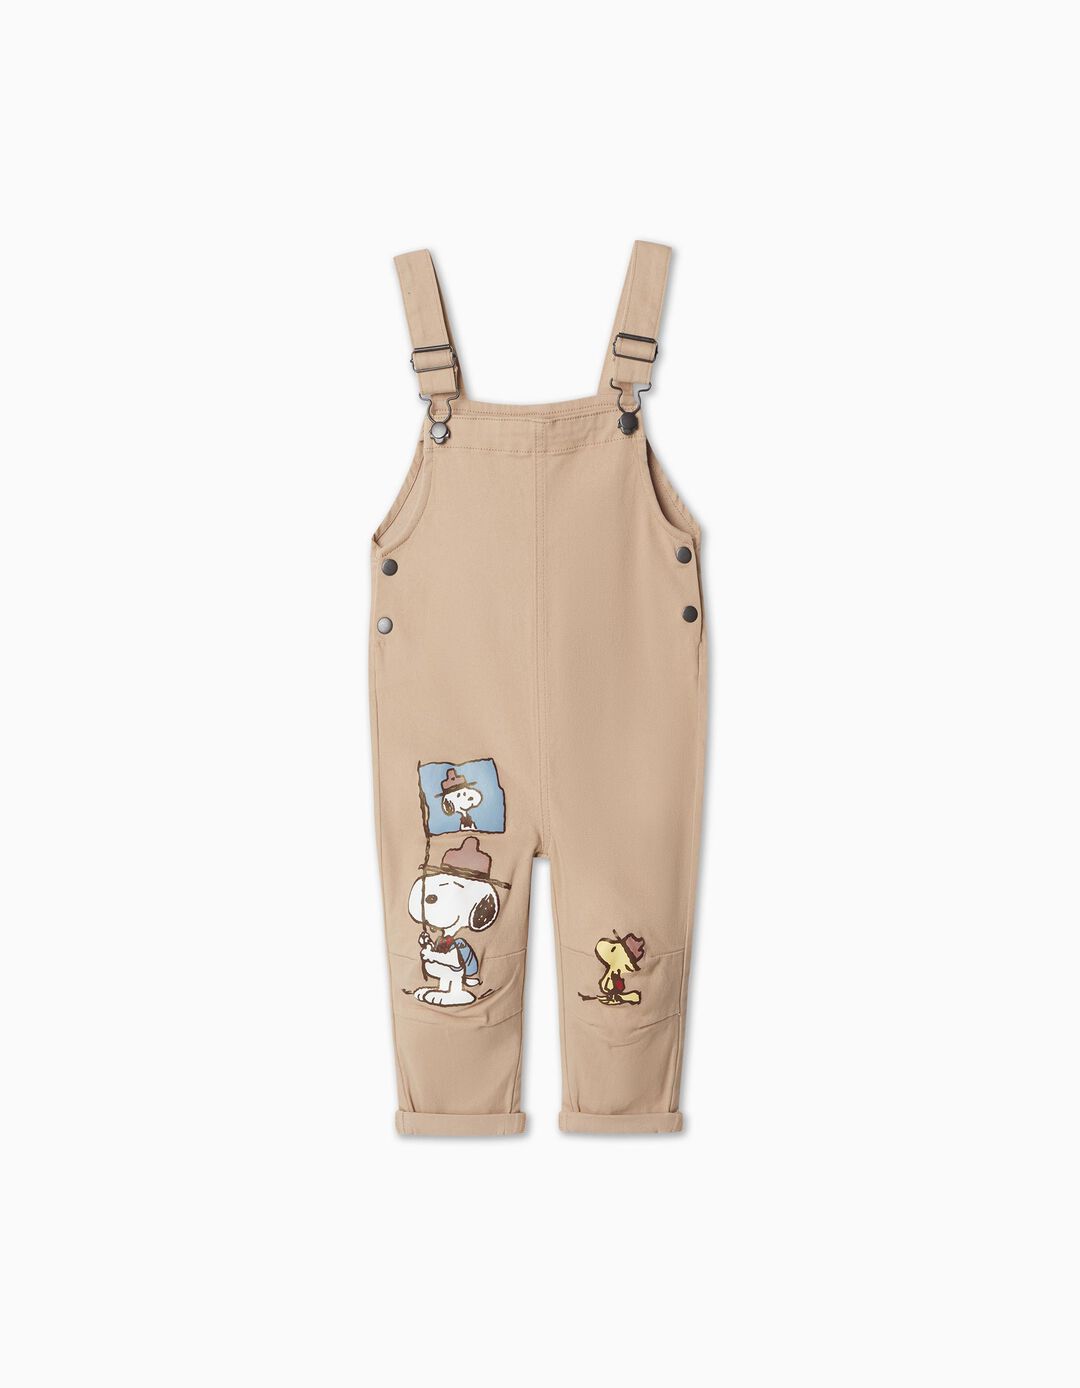 Dungarees 'Snoopy', Baby Boy, Beige